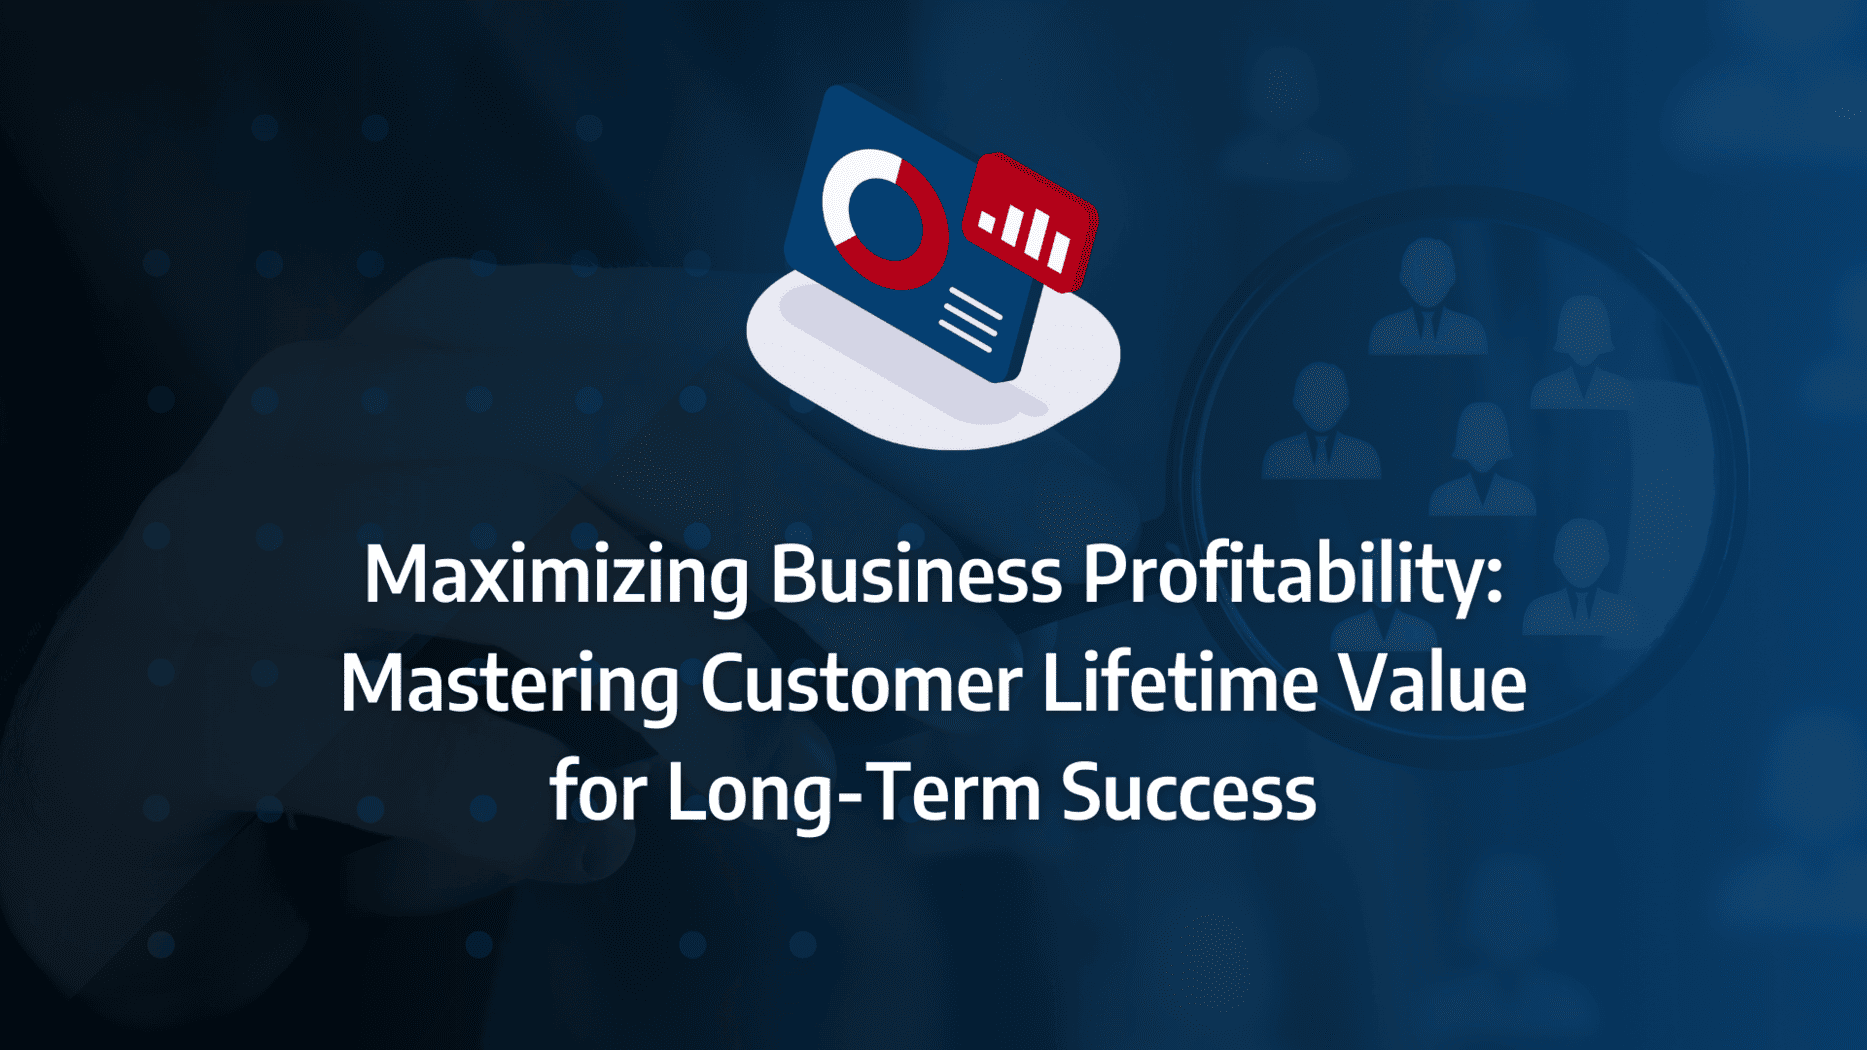 Customer lifetime value: Maximizing business profitability through strategic lifetime value analysis, precise customer lifetime calculations, average value assessment, and comprehensive customer cycle management.: strategy framework diagram for customer lifetime calculation, customer lifetime value analysis, average lifetime value, customer lifetime cycle